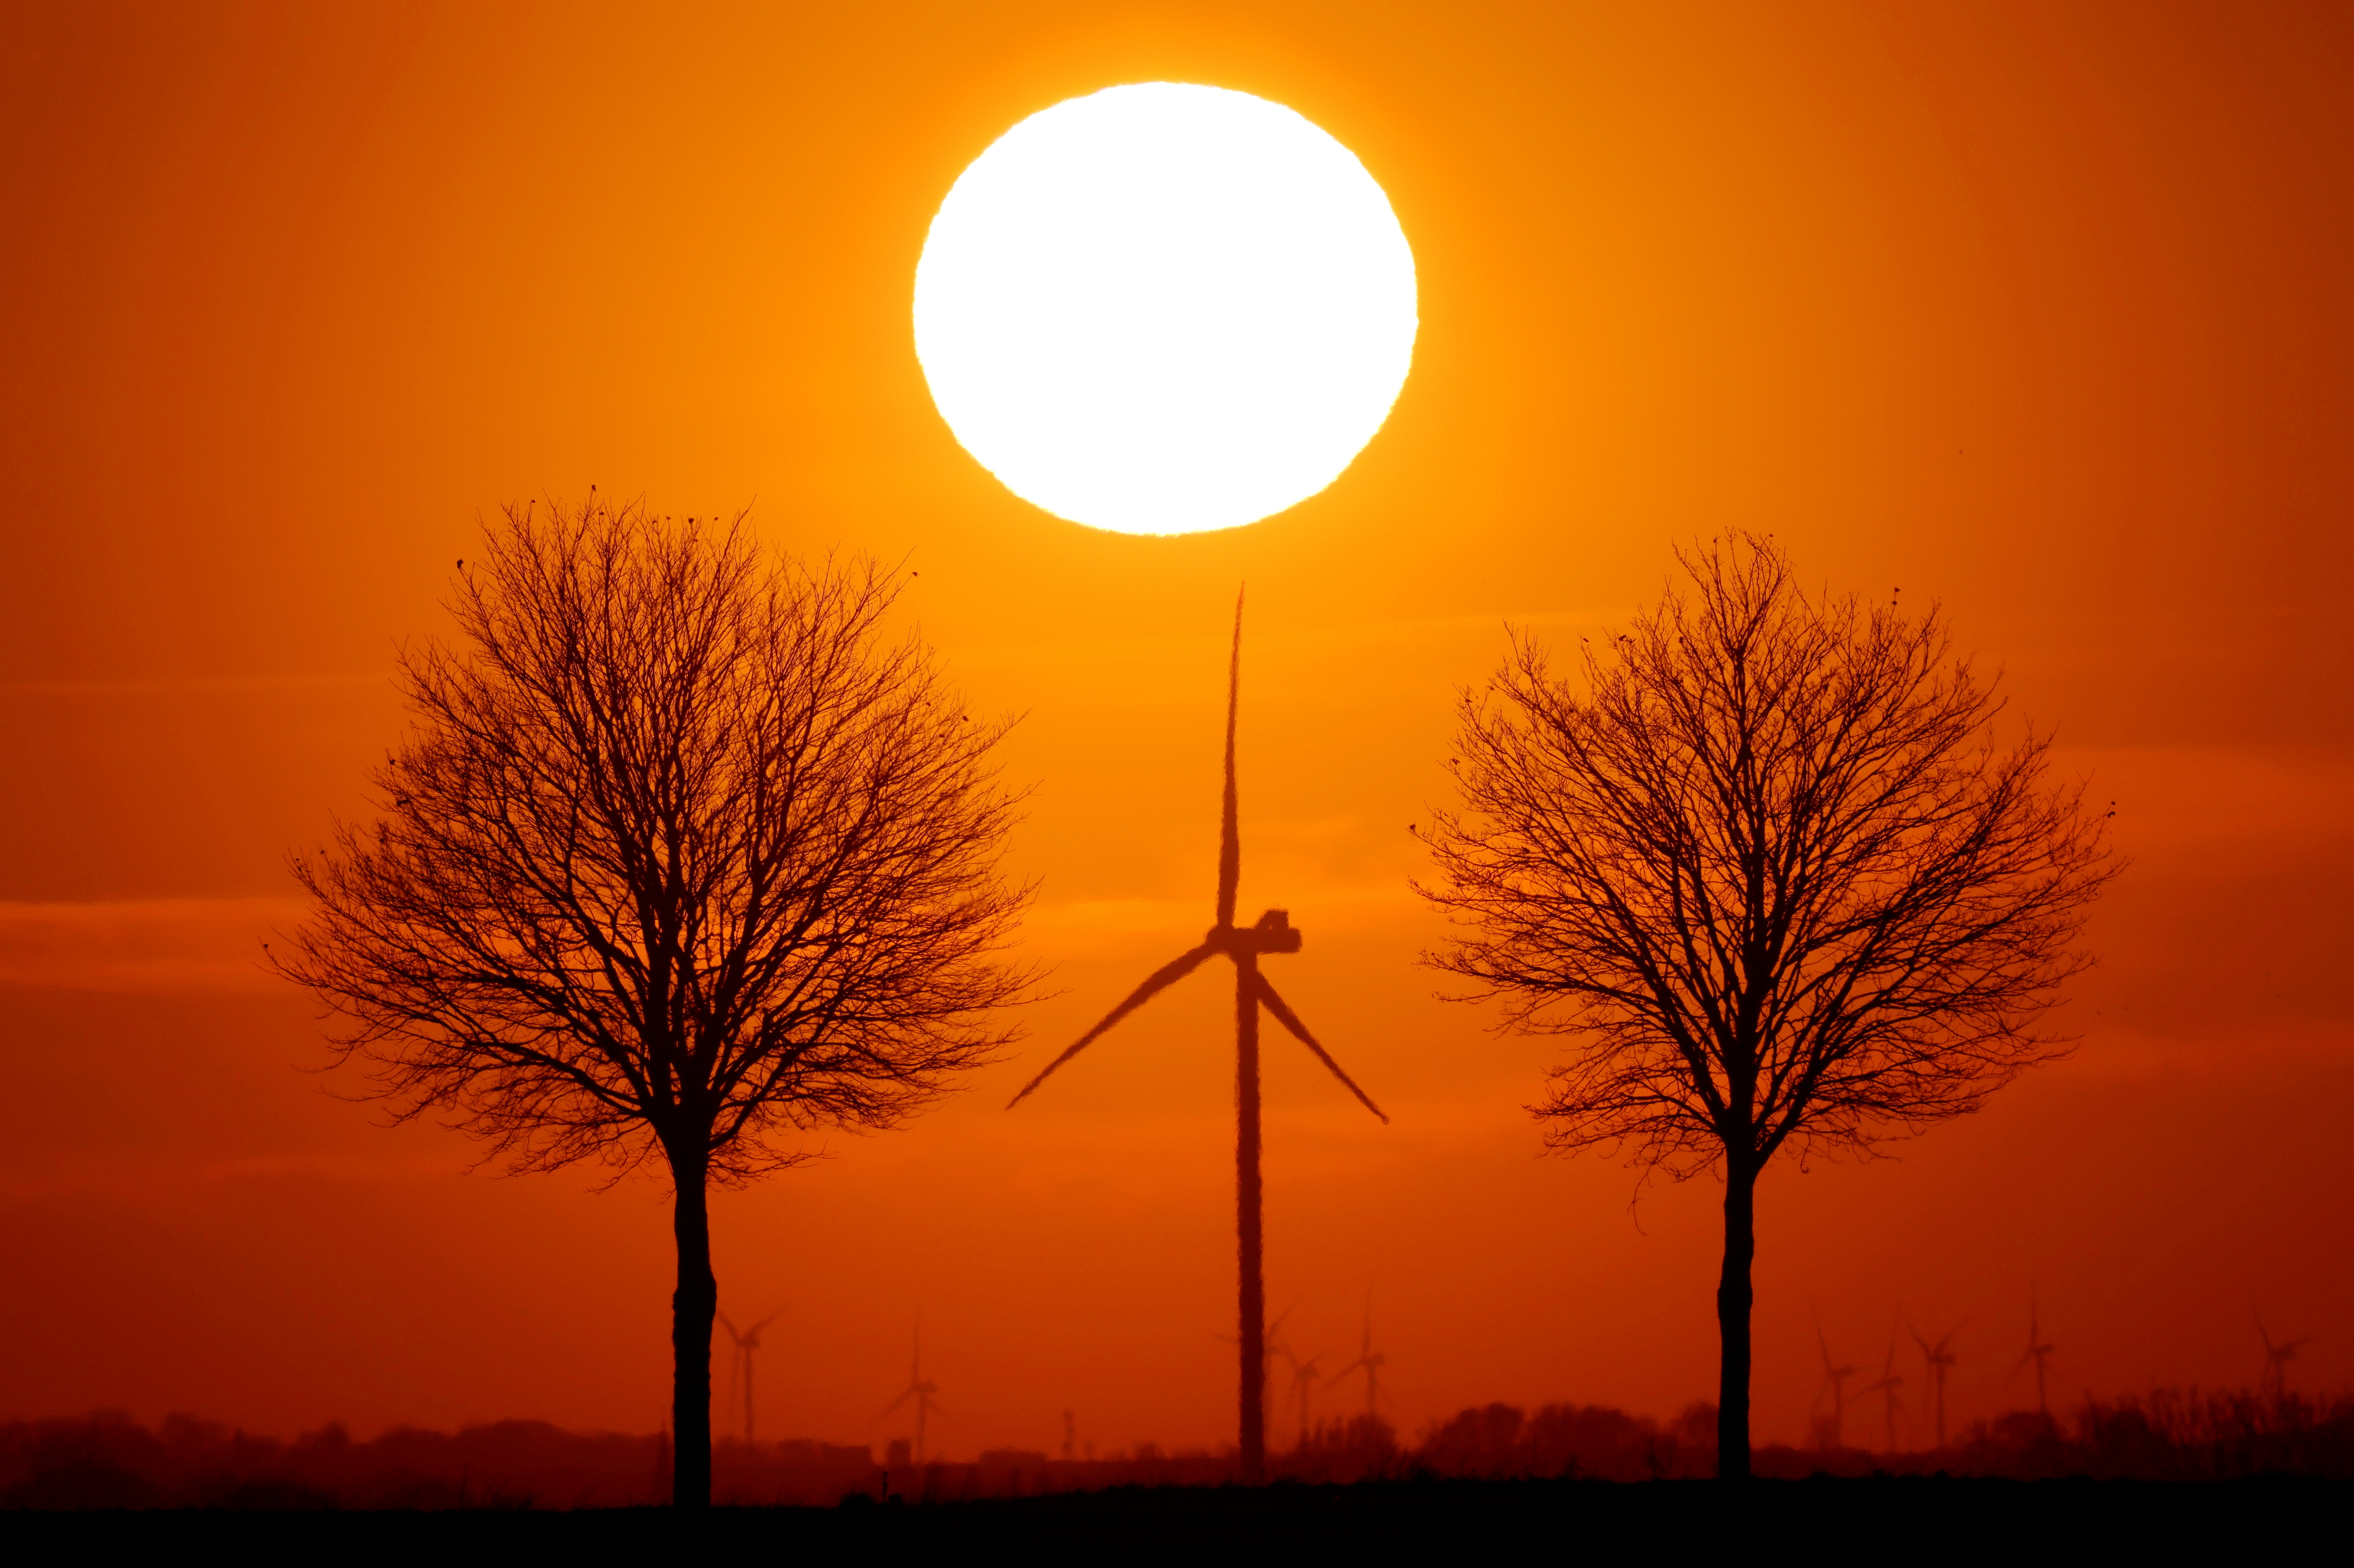 Power-generating windmill turbines are seen during sunset in Bourlon